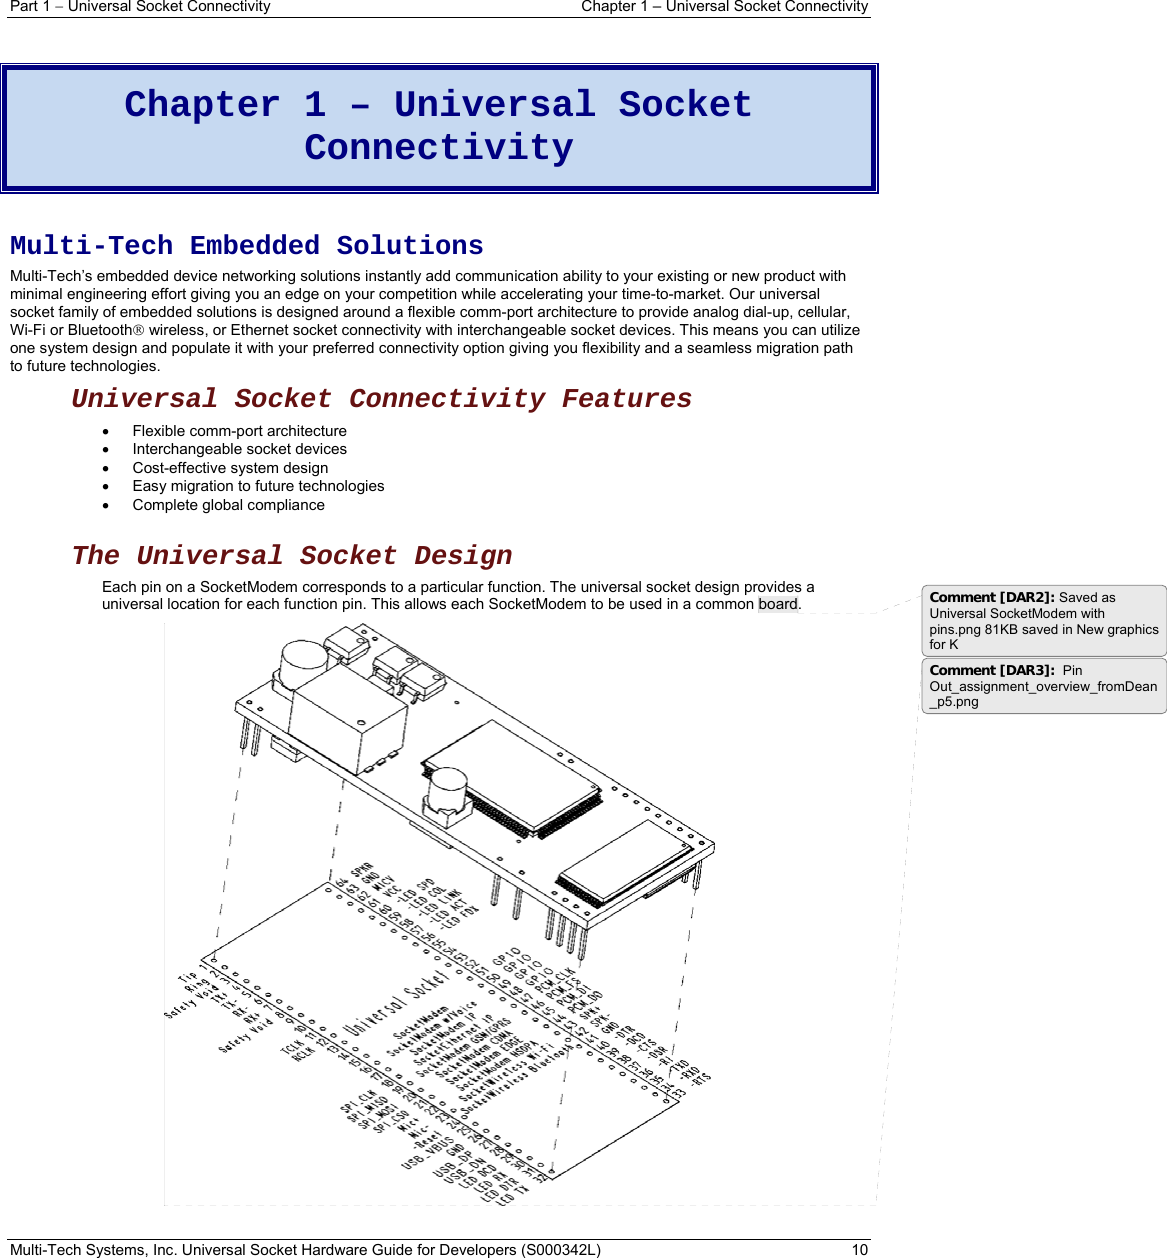 Part 1  Universal Socket Connectivity    Chapter 1 – Universal Socket Connectivity Multi-Tech Systems, Inc. Universal Socket Hardware Guide for Developers (S000342L)  10   Chapter 1 – Universal Socket Connectivity  Multi-Tech Embedded Solutions Multi-Tech’s embedded device networking solutions instantly add communication ability to your existing or new product with minimal engineering effort giving you an edge on your competition while accelerating your time-to-market. Our universal socket family of embedded solutions is designed around a flexible comm-port architecture to provide analog dial-up, cellular, Wi-Fi or Bluetooth wireless, or Ethernet socket connectivity with interchangeable socket devices. This means you can utilize one system design and populate it with your preferred connectivity option giving you flexibility and a seamless migration path to future technologies.  Universal Socket Connectivity Features   Flexible comm-port architecture    Interchangeable socket devices  Cost-effective system design   Easy migration to future technologies   Complete global compliance  The Universal Socket Design  Each pin on a SocketModem corresponds to a particular function. The universal socket design provides a universal location for each function pin. This allows each SocketModem to be used in a common board.   Comment [DAR2]: Saved as Universal SocketModem with pins.png 81KB saved in New graphics for K Comment [DAR3]:  Pin Out_assignment_overview_fromDean_p5.png